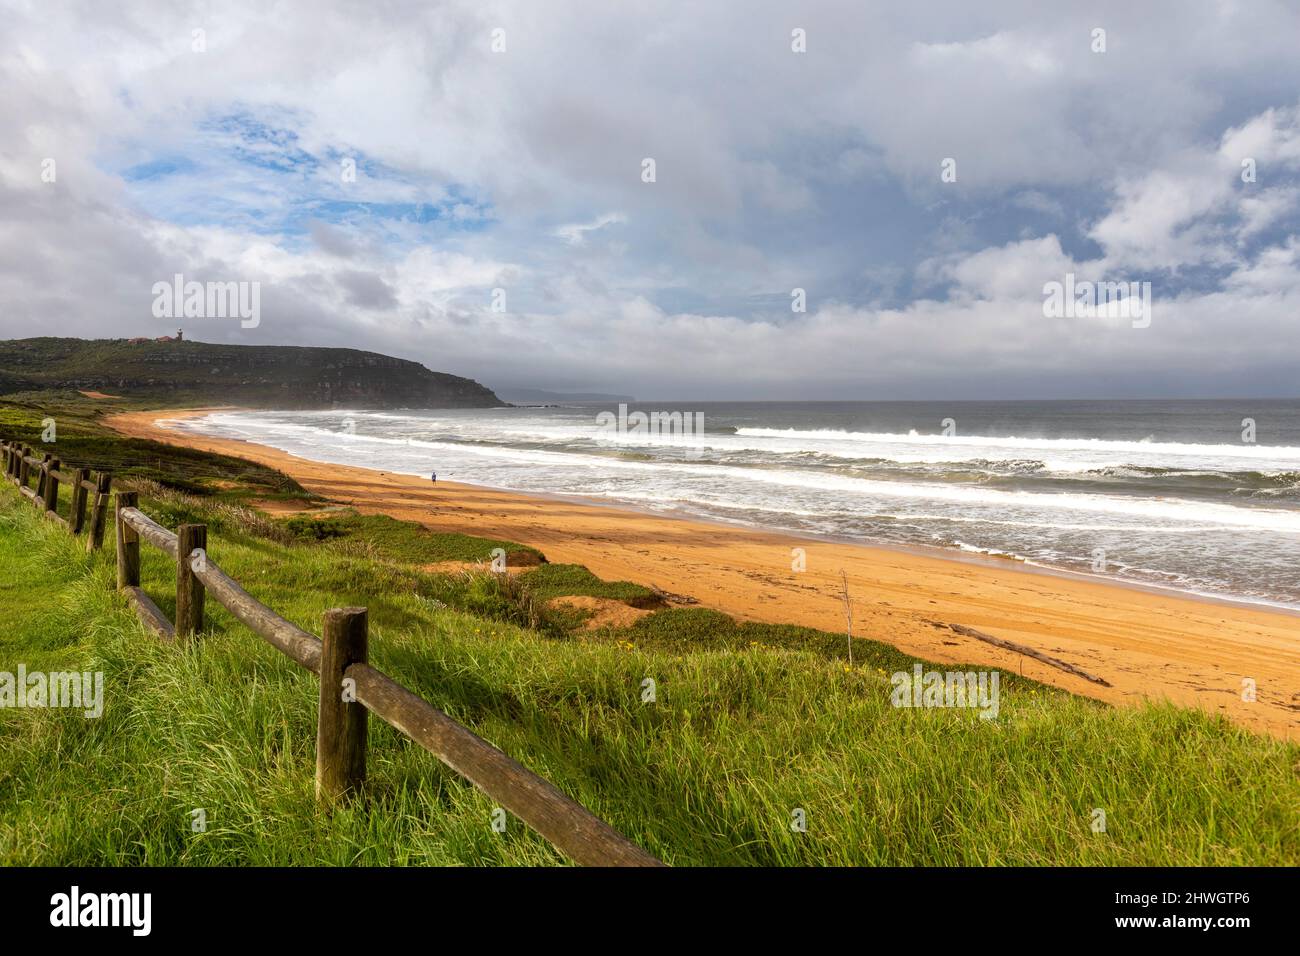 Sydney, Australia. 06th Mar, 2022. The low pressure system along the east coast of Australia will continue into next week as heavy rains and floods affect communities in New South Wales and Queensland. Pictured Palm Beach in Sydney with debris strewn across the beach from the stormy weather and strong surf conditions, Credit Martin Berry@alamy live news. Credit: martin berry/Alamy Live News Stock Photo